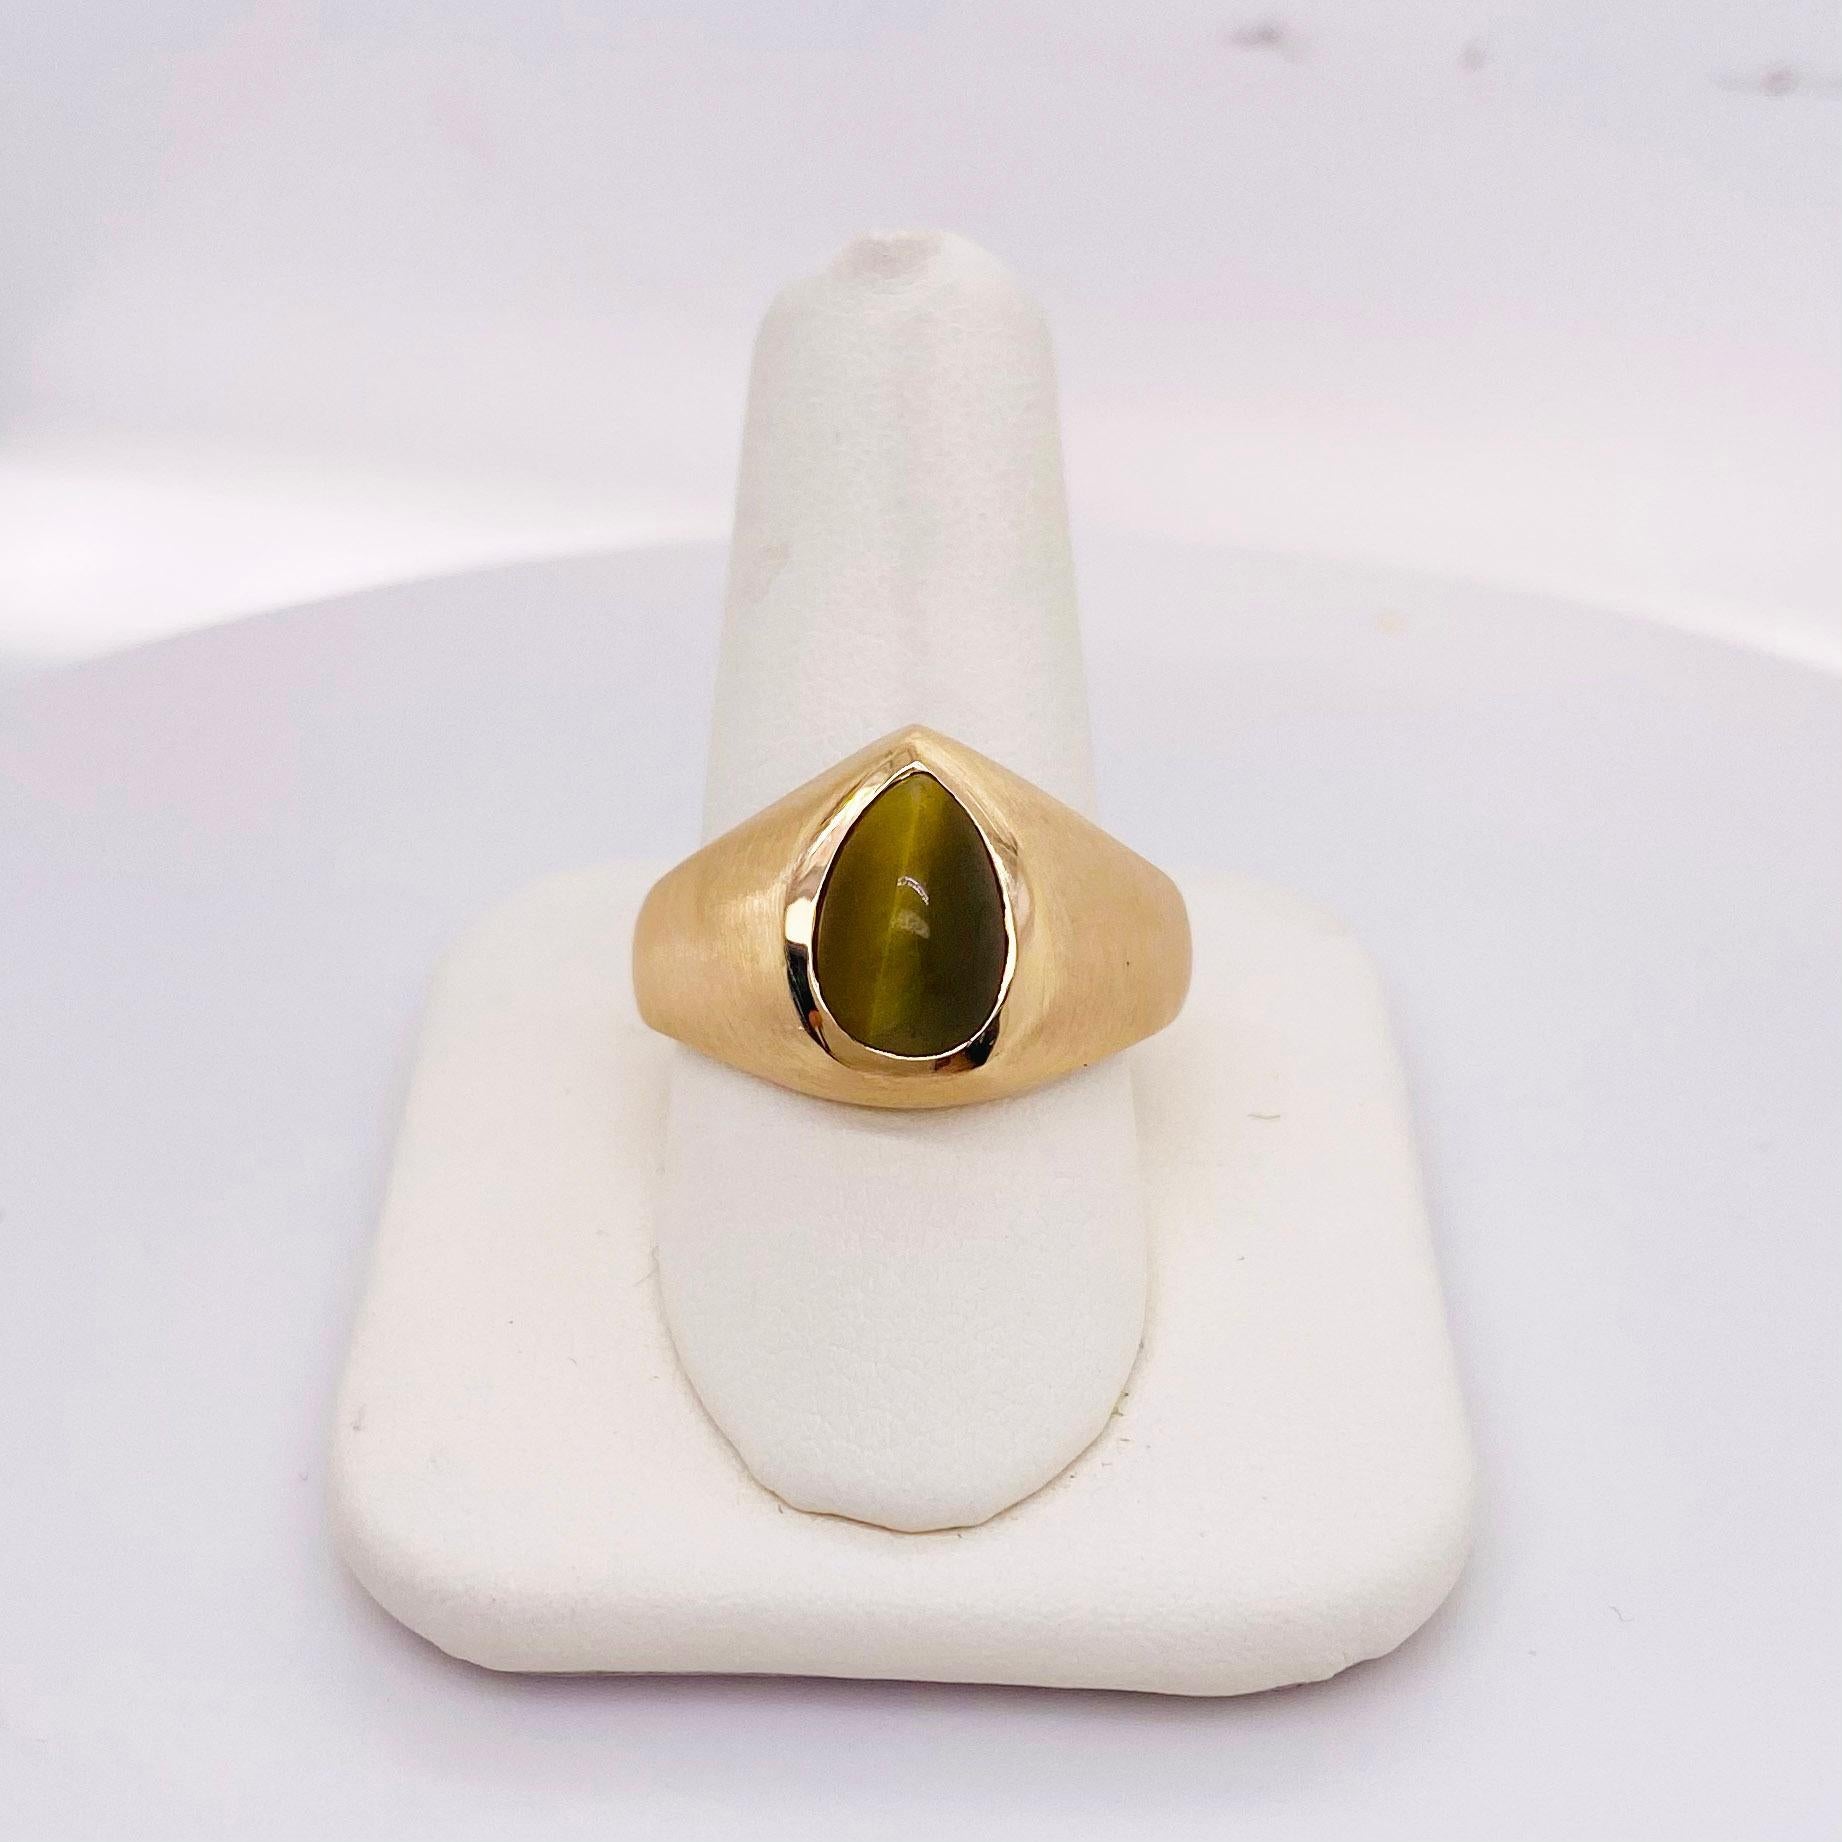 The man’s ring is 10 karat yellow gold with a honey tiger eye in well carved pear shape. The gold has a beautiful brush finish that would look amazing on any finger. The details for this beautiful ring are listed below:
Metal Quality: 10 k